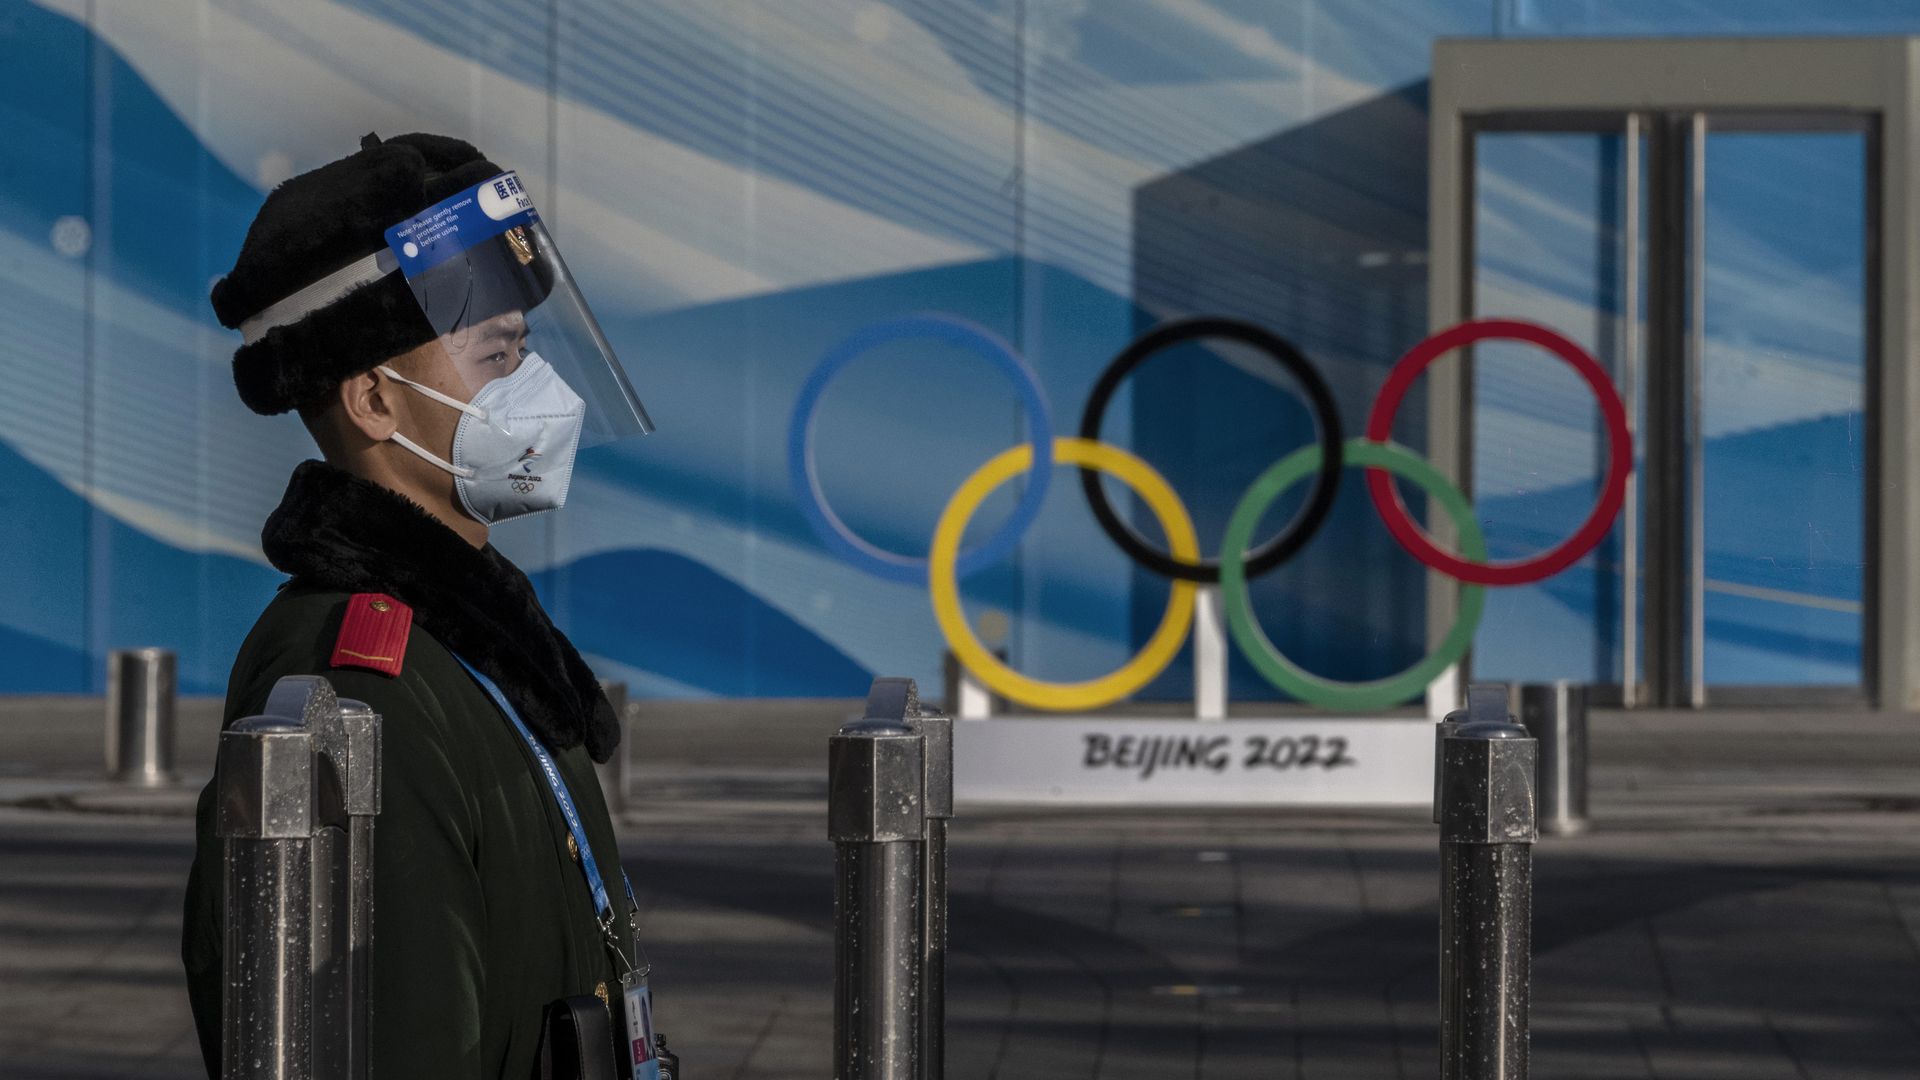 A police officer stands guard inside the closed loop bubble to protect against the spread of COVID-19 for the Beijing 2022 Winter Olympics near the main media center at the Olympic Park.